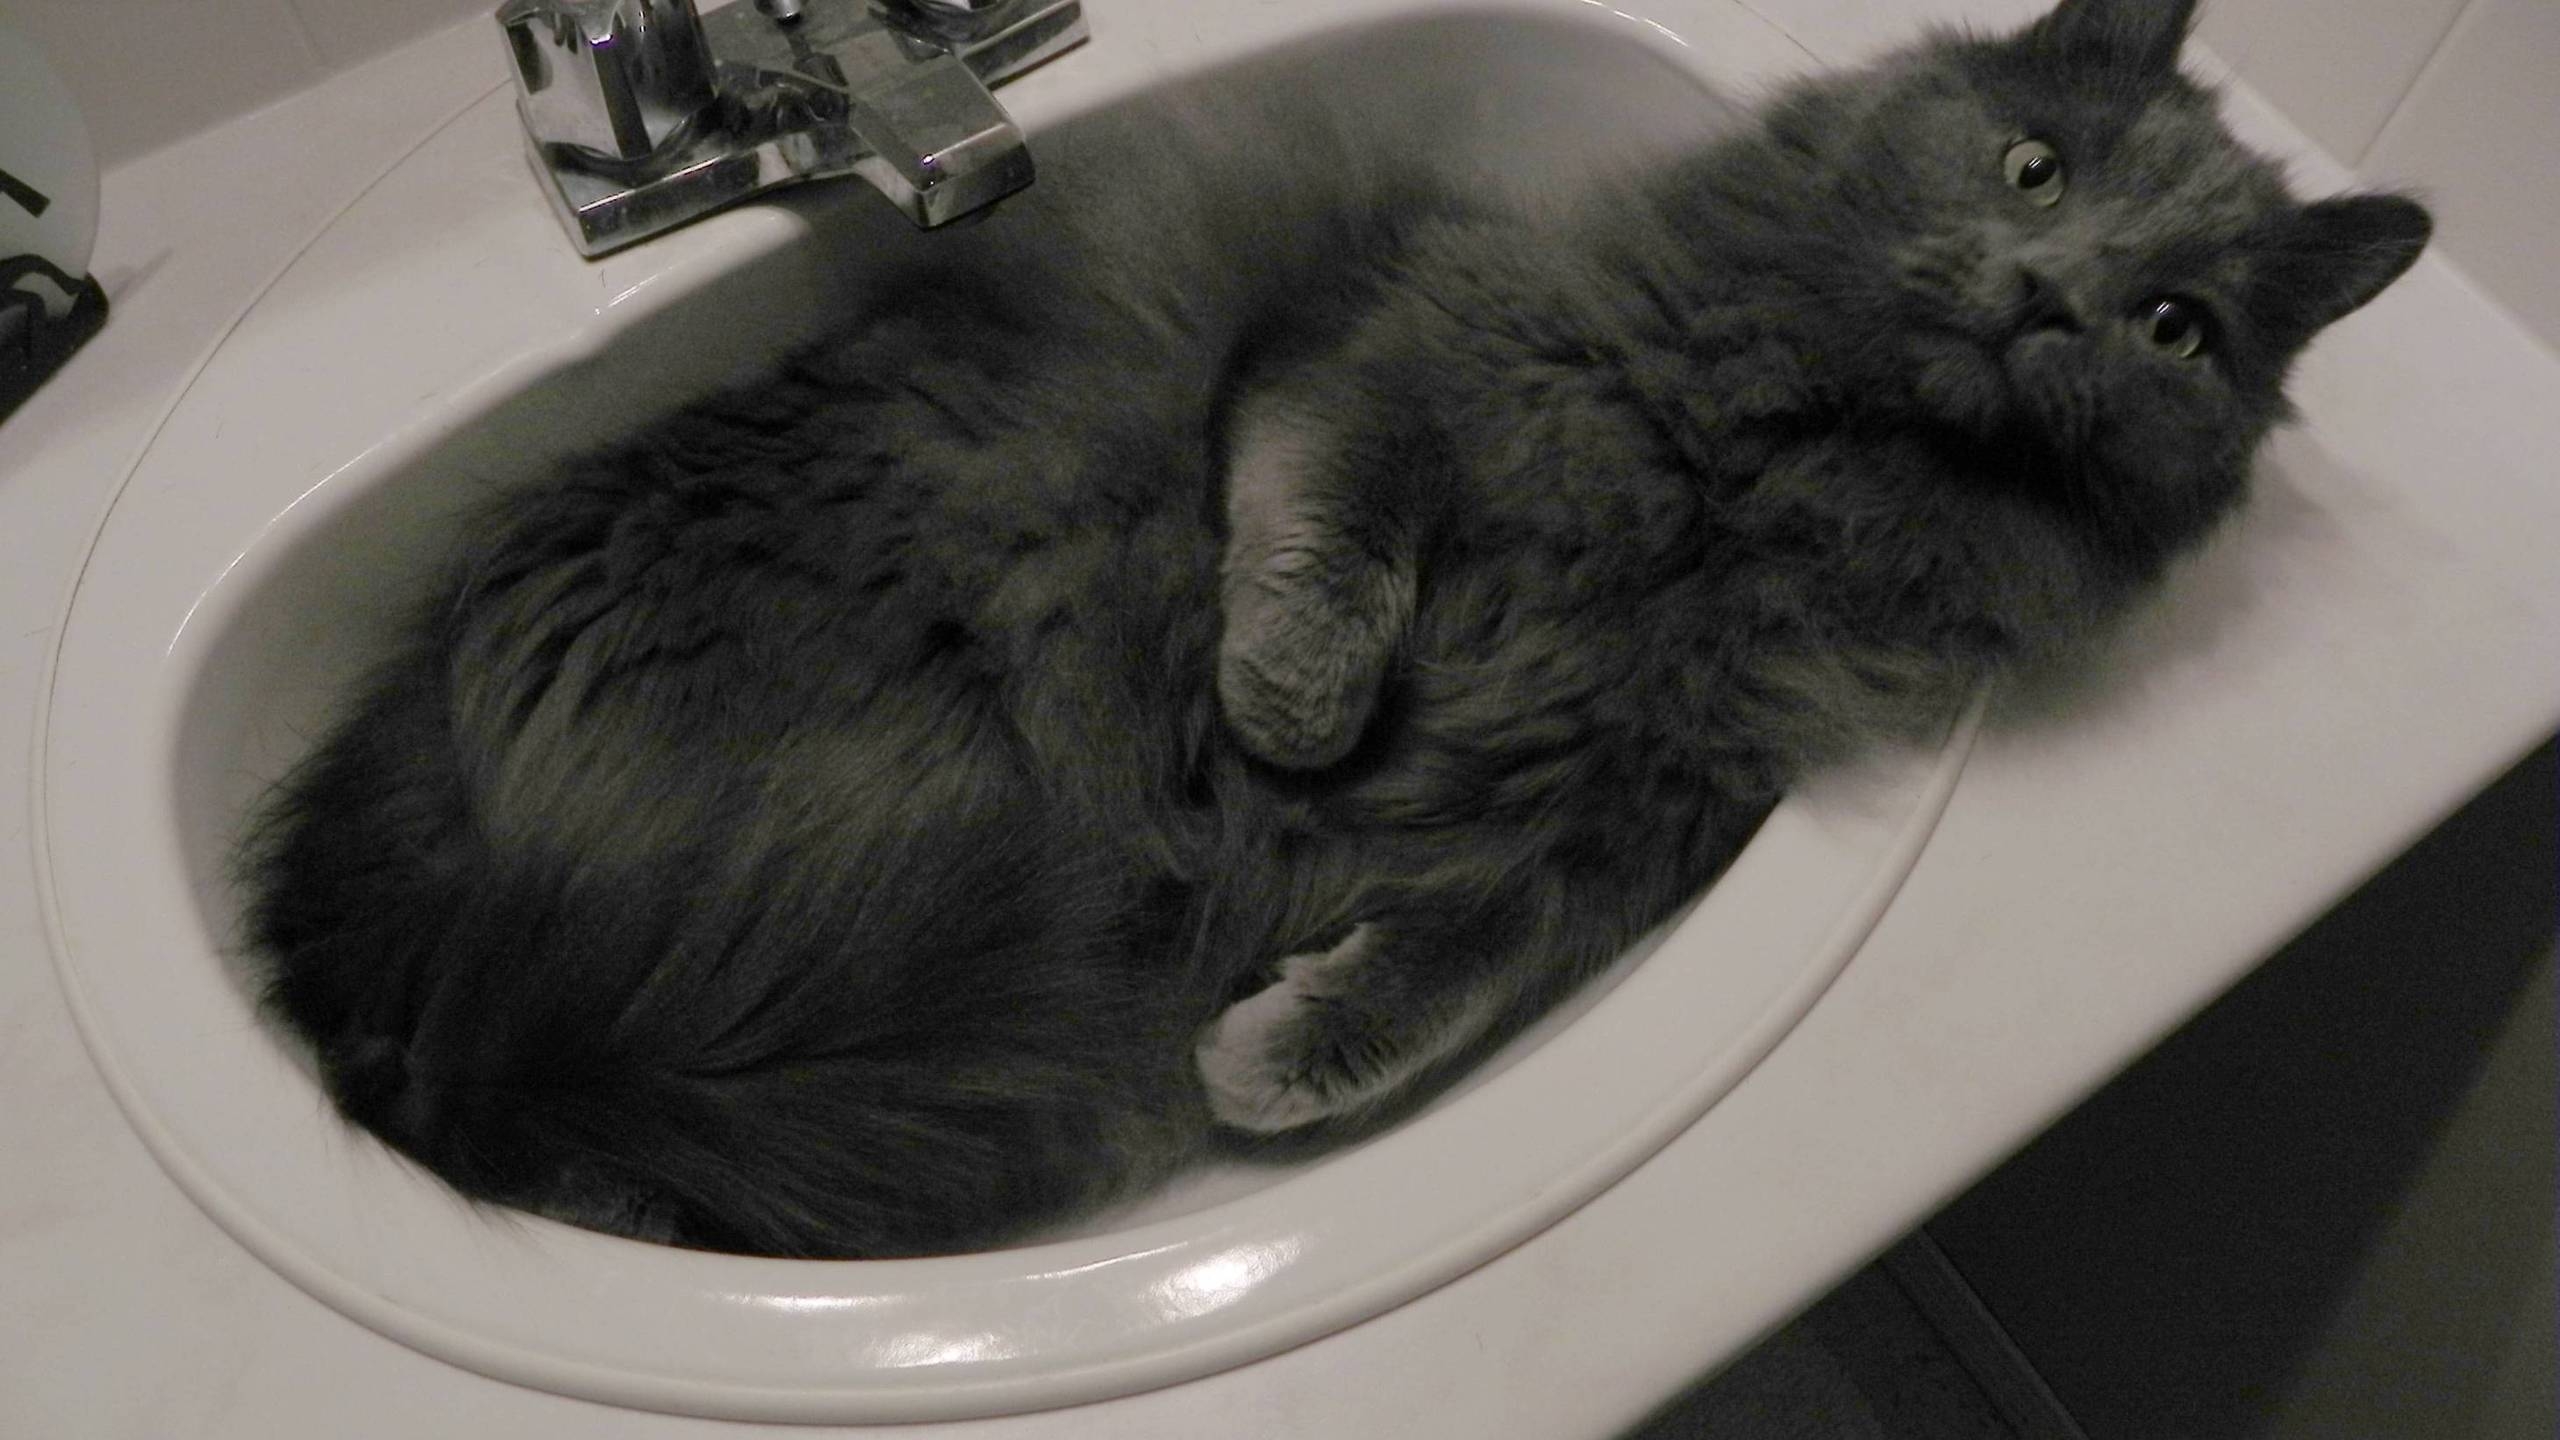 Nebelung Cat in Sink for 2560x1440 HDTV resolution